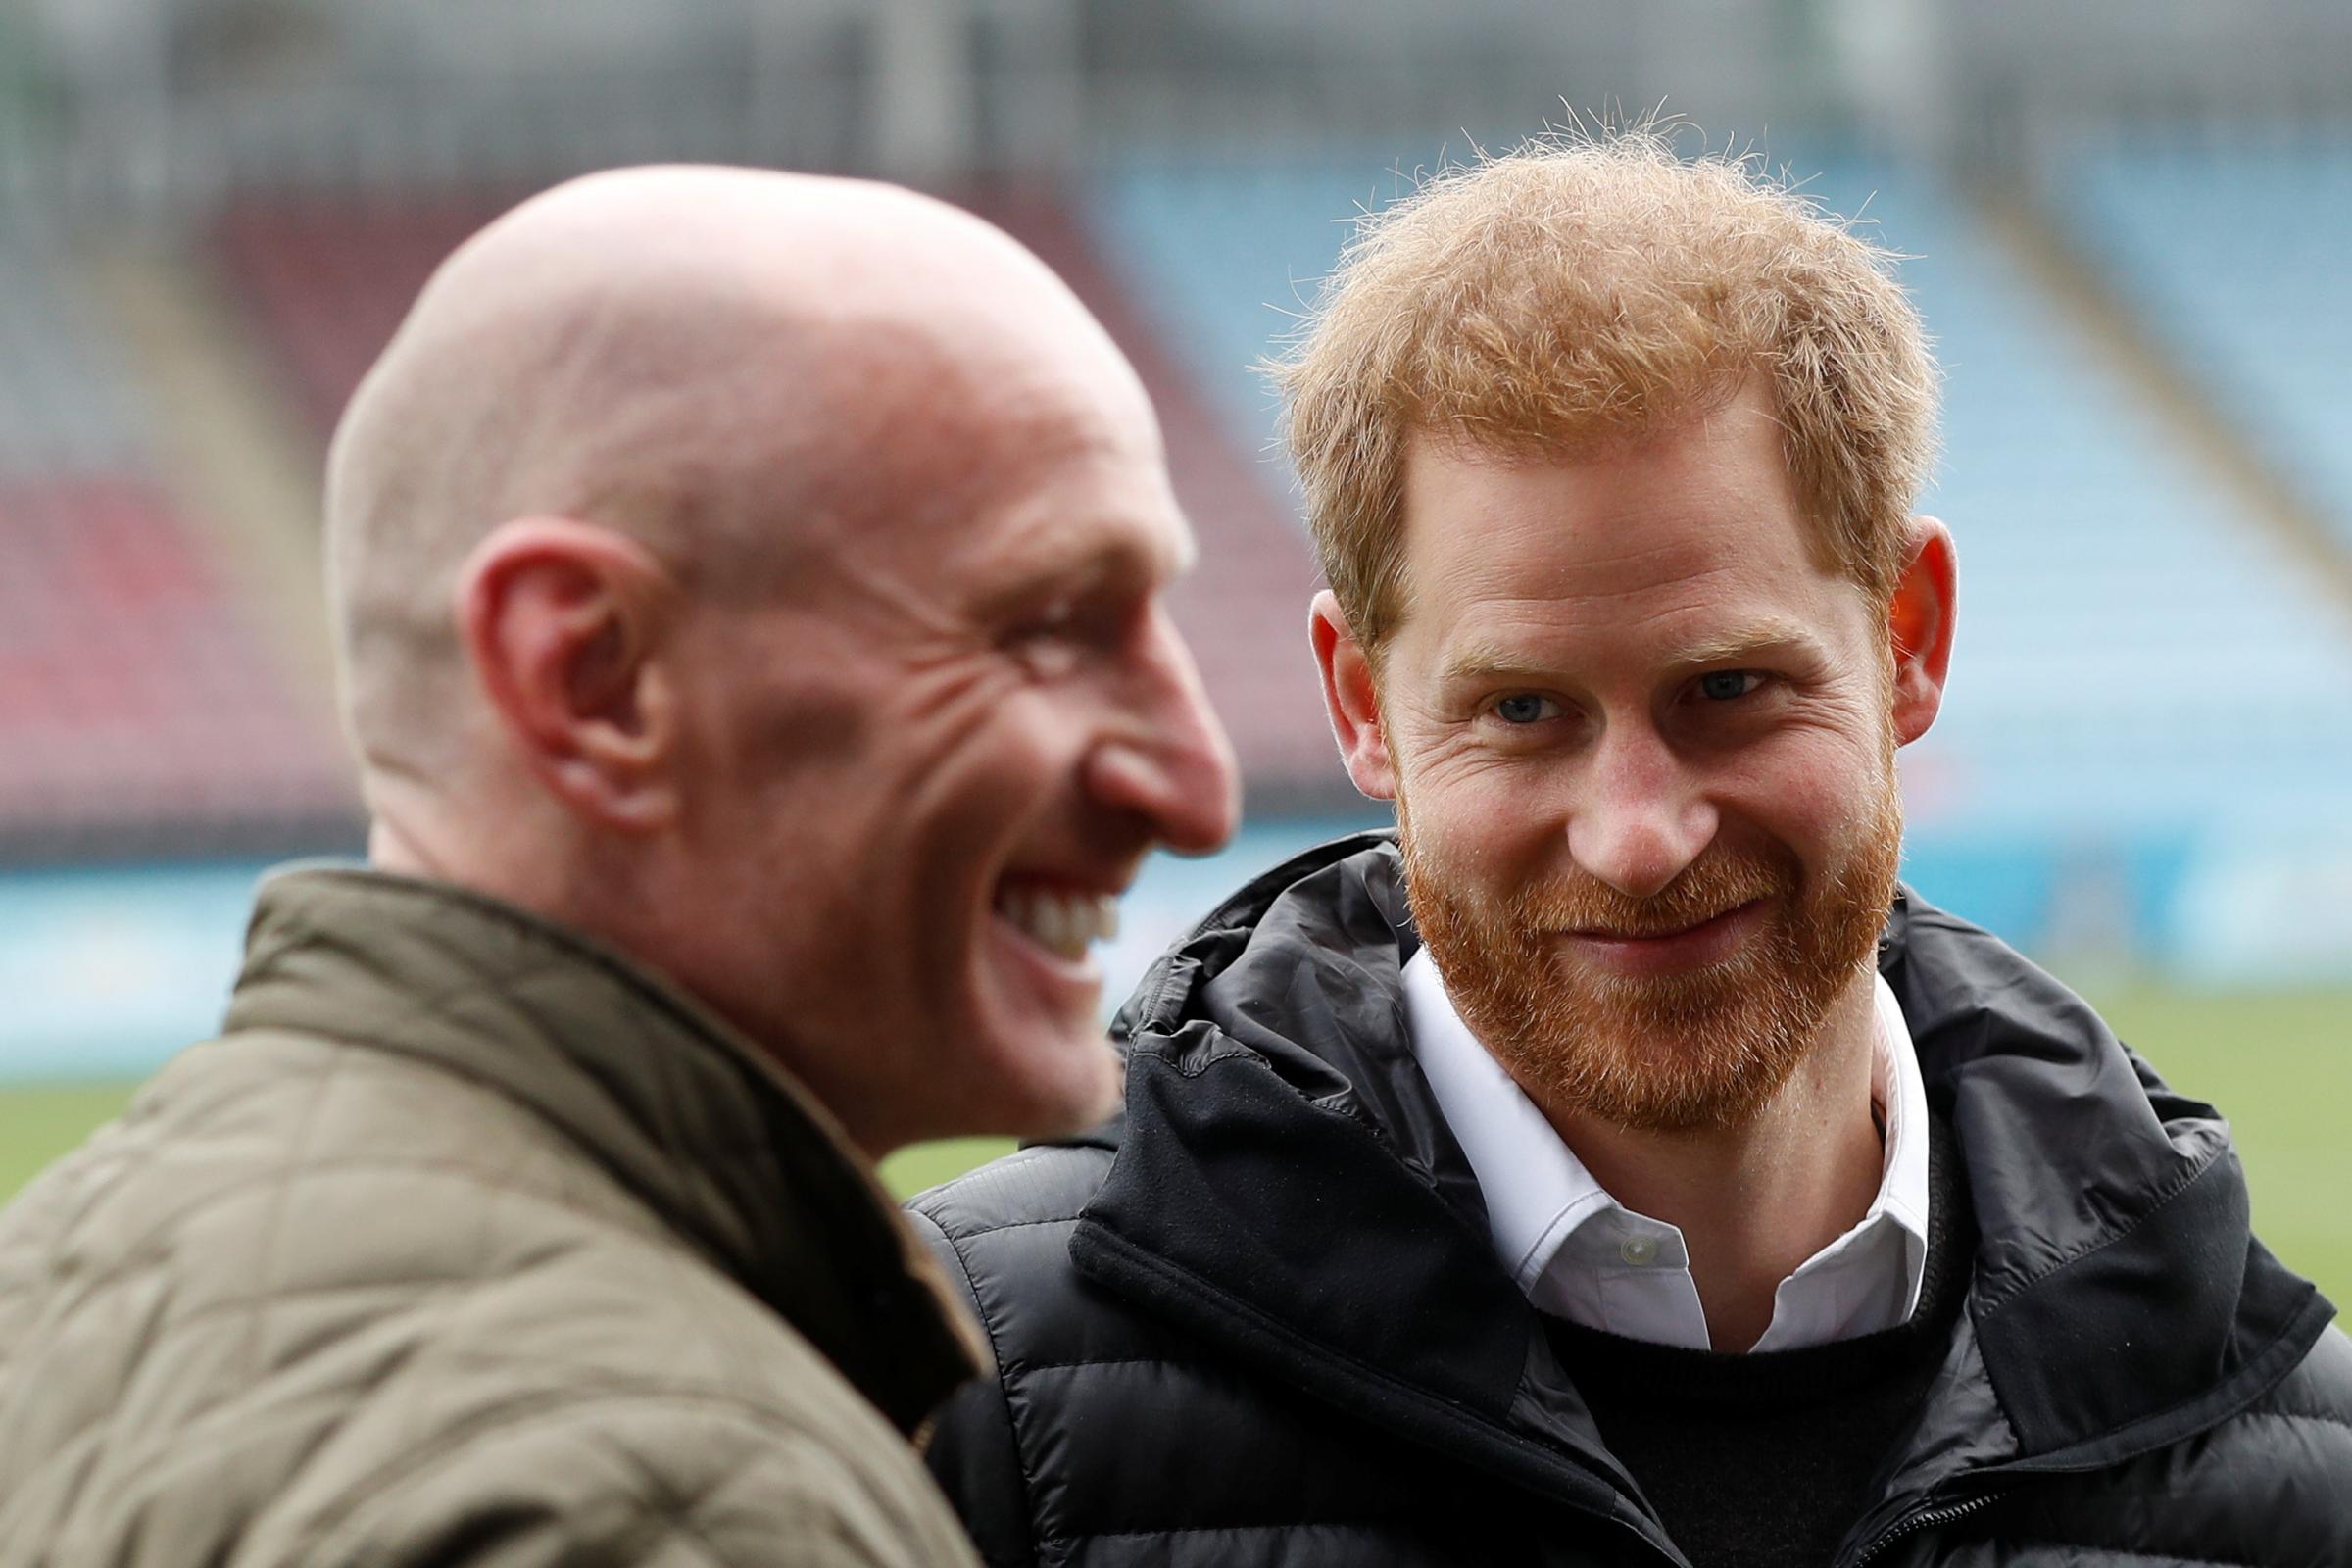 Duke of Sussex and Gareth Thomas unite to promote HIV testing - Ealing Times